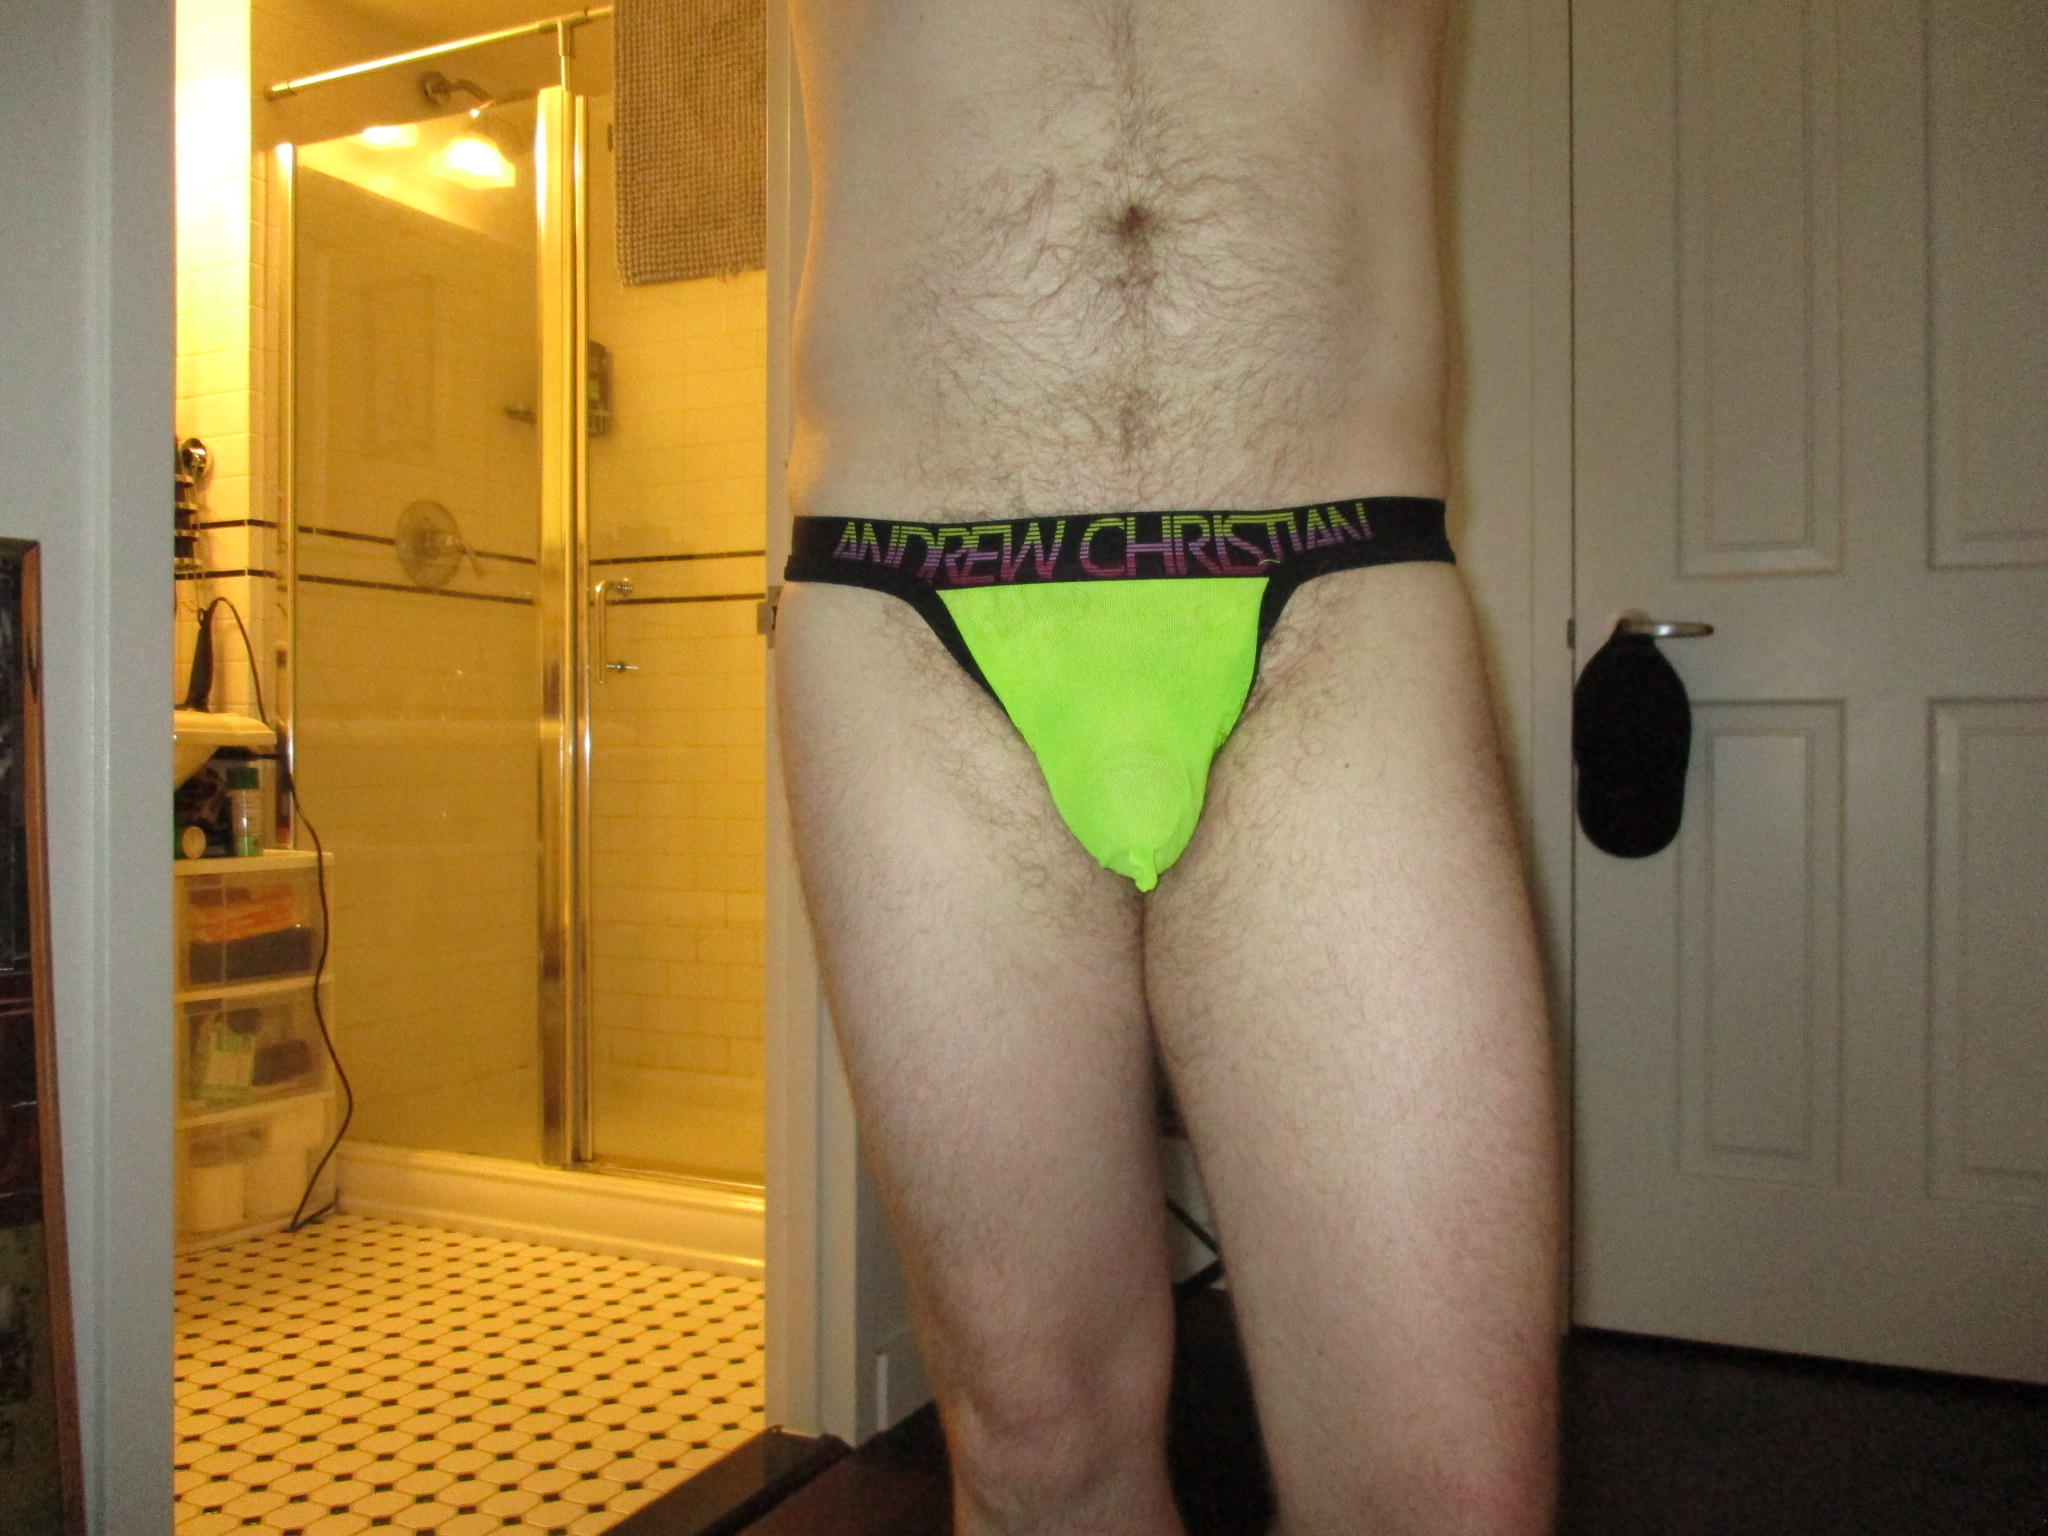 Mesh, bright mesh for my thong today…